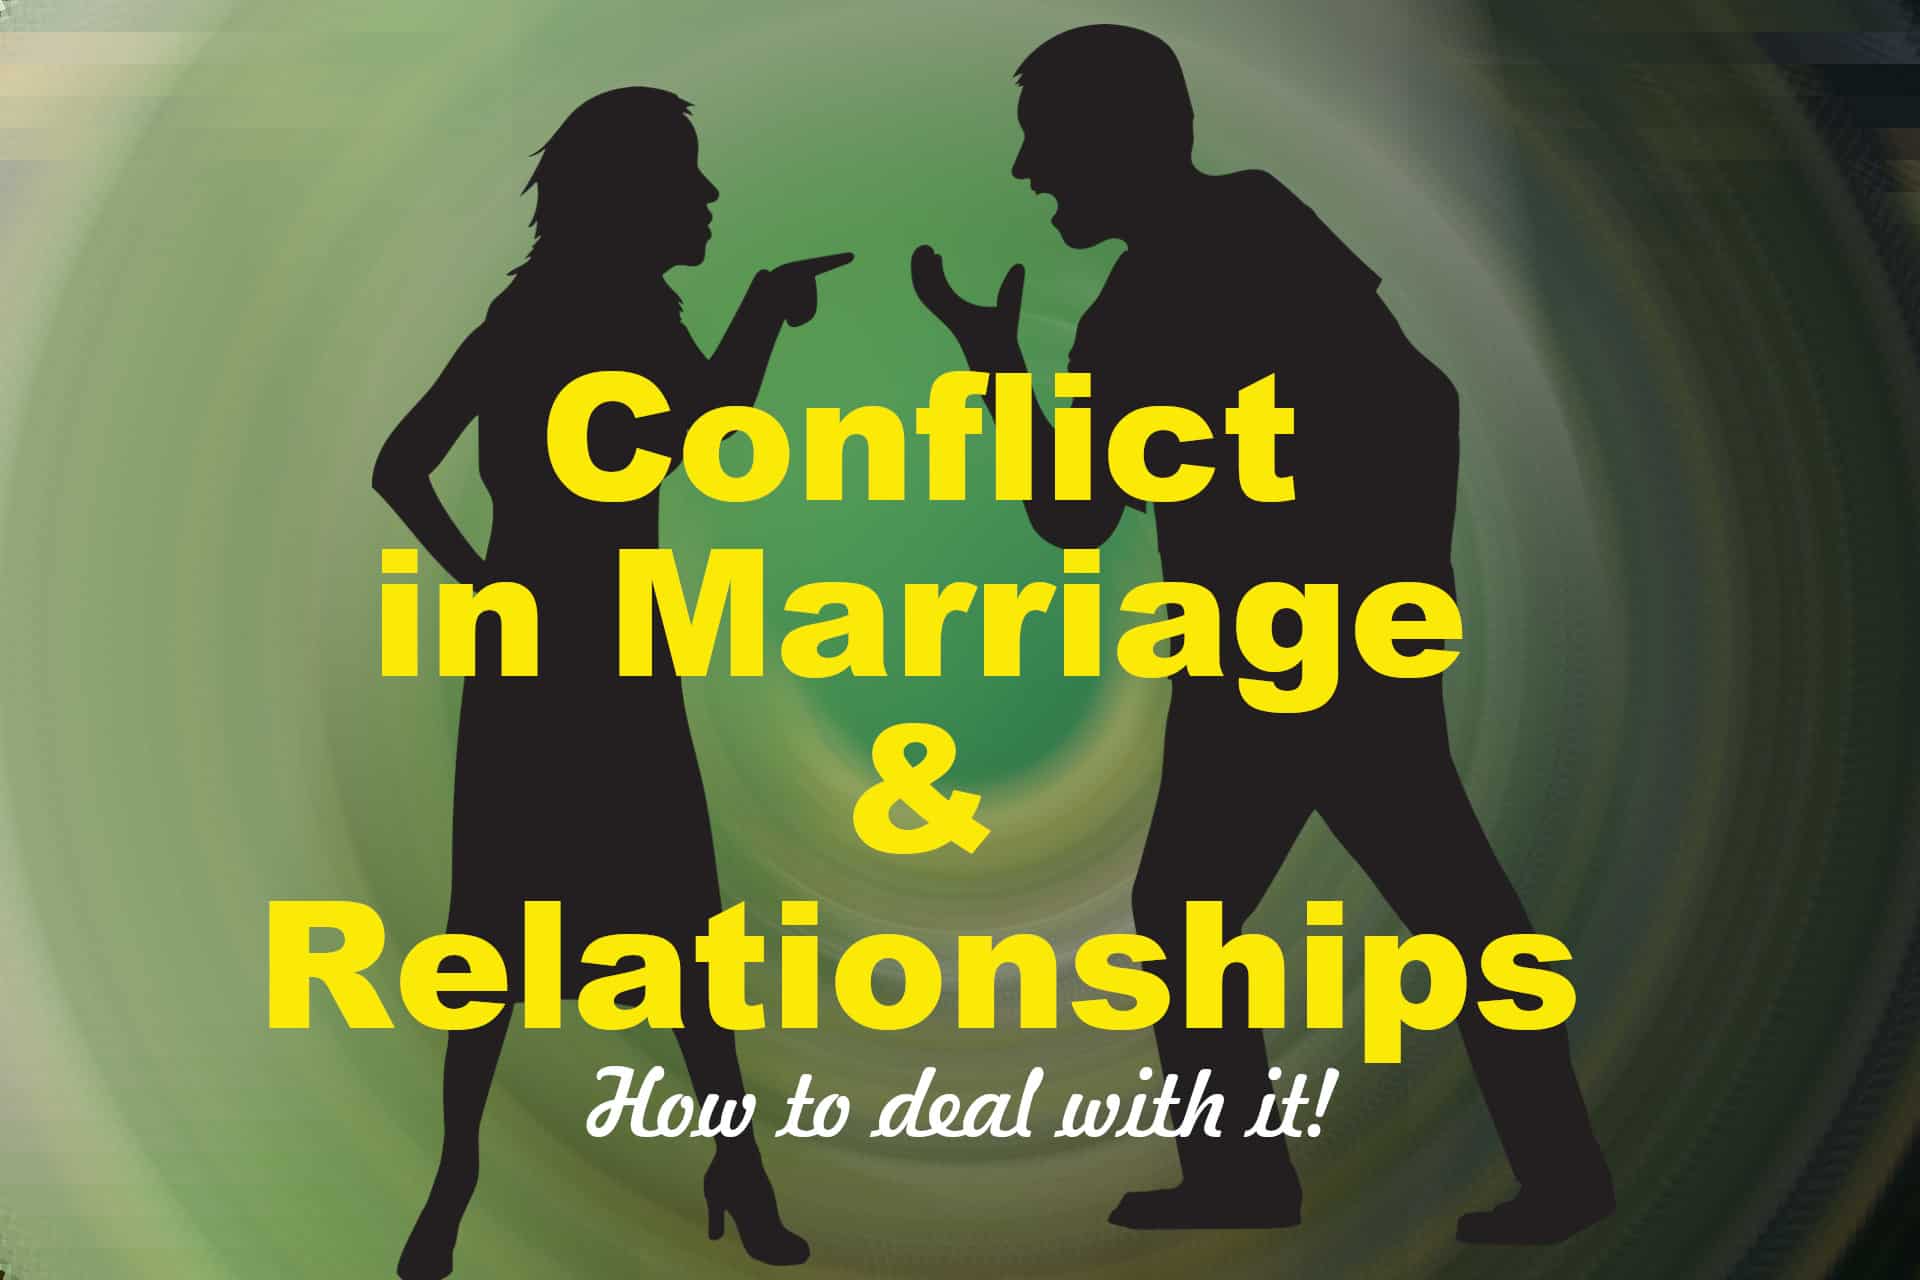 Conflict in marriage relationship